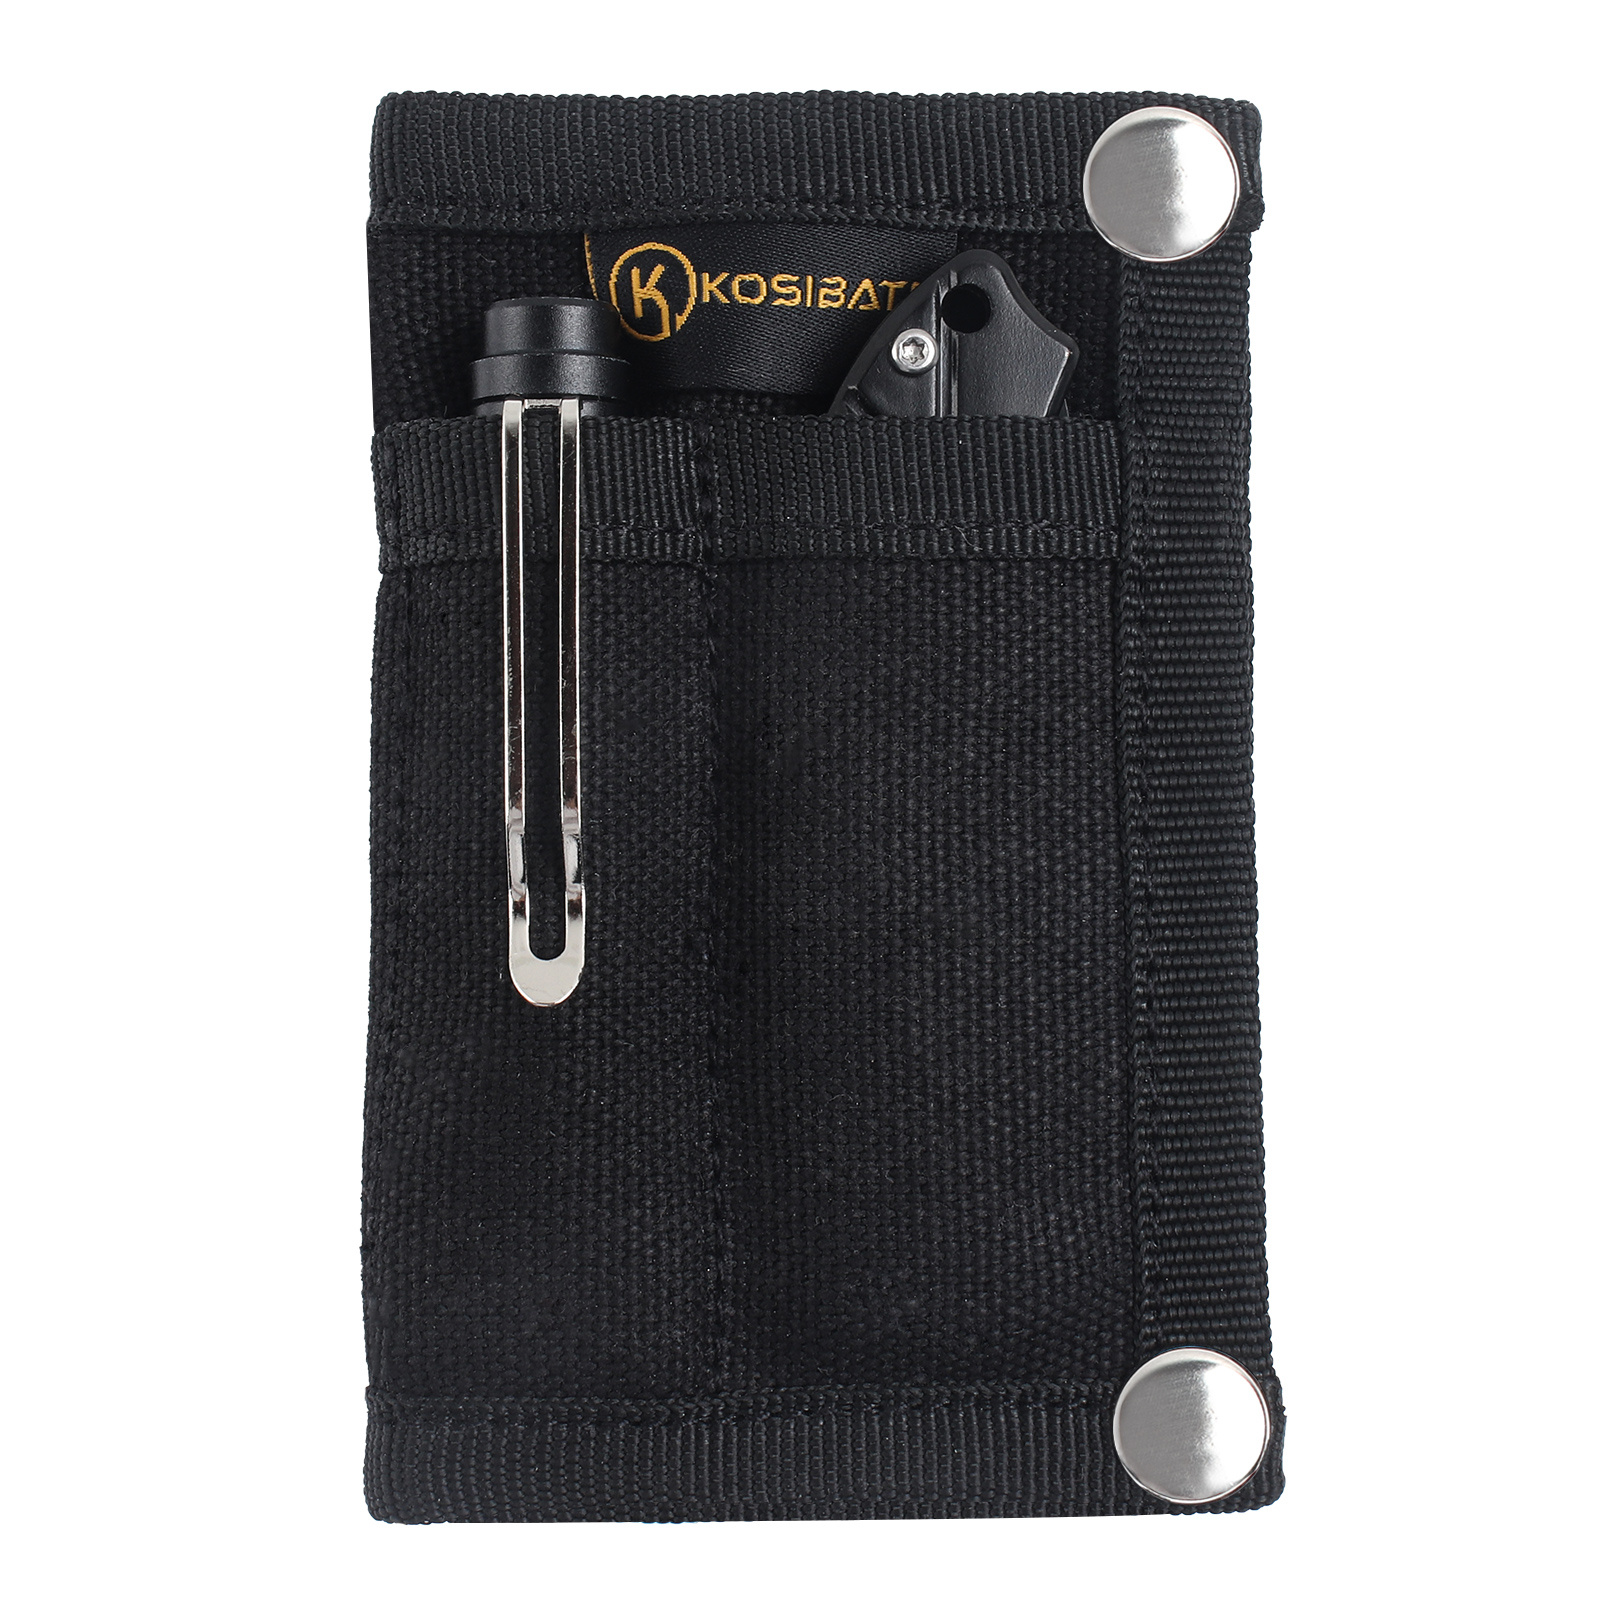 Crowdstage EDC Pouch for Men, EDC Pocket Organizer Storage EDC Gears, Best EDC  Organizer to Hold Your Flashlight/Pocket Knife, Tactical Pen, Notebook 